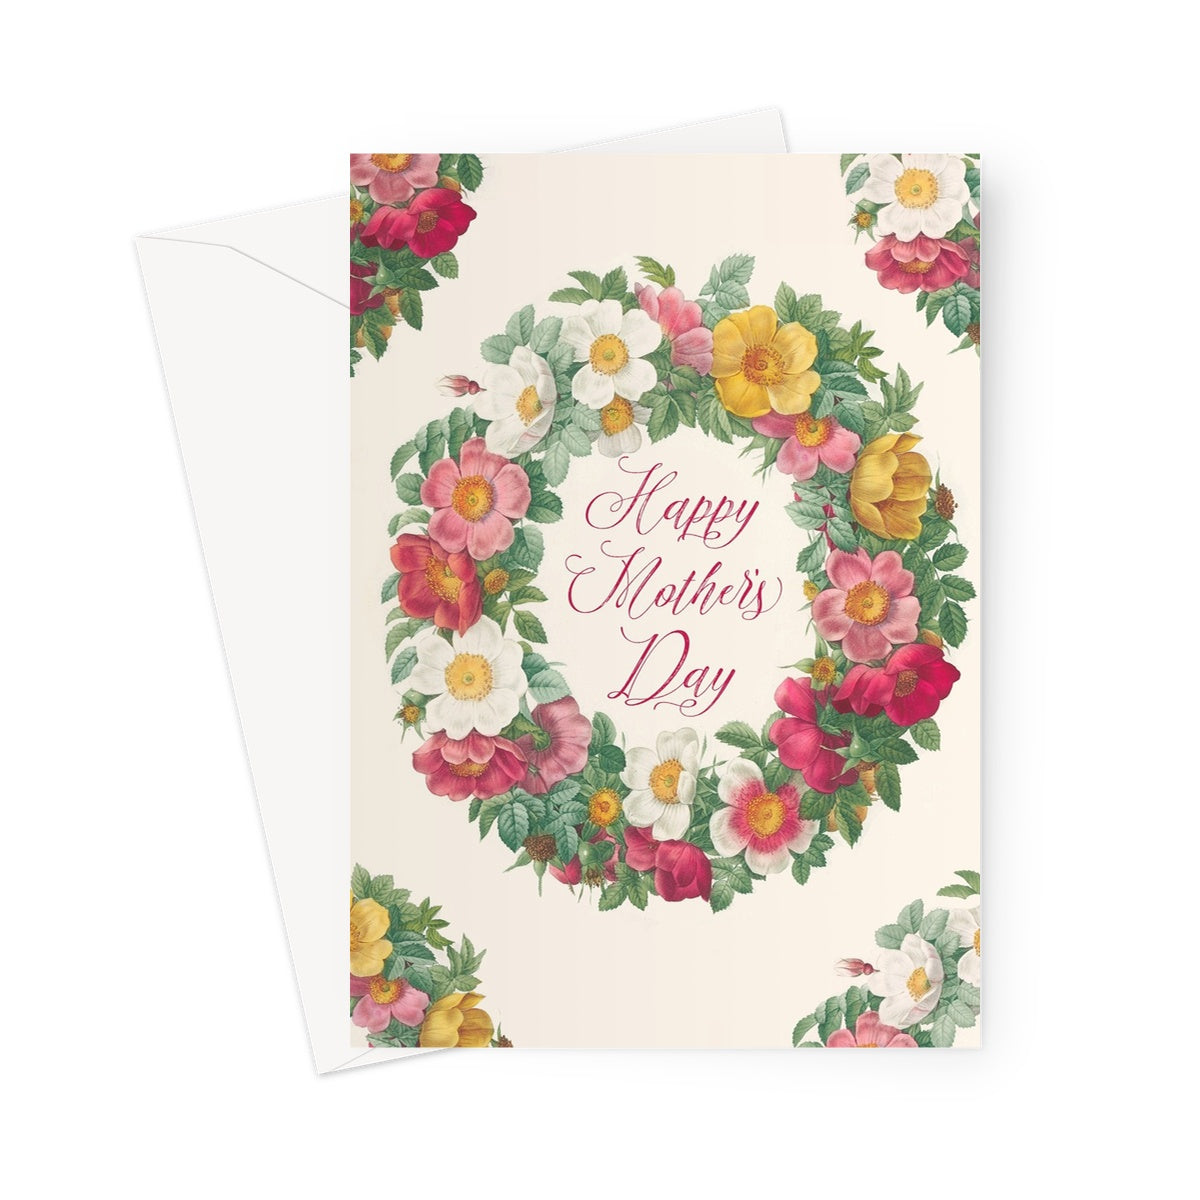 Mother's Day card, 5x7" mothers day card, flowers mothers day acrd, floral pattern mothers day card, Modeabode happy mothers day card.